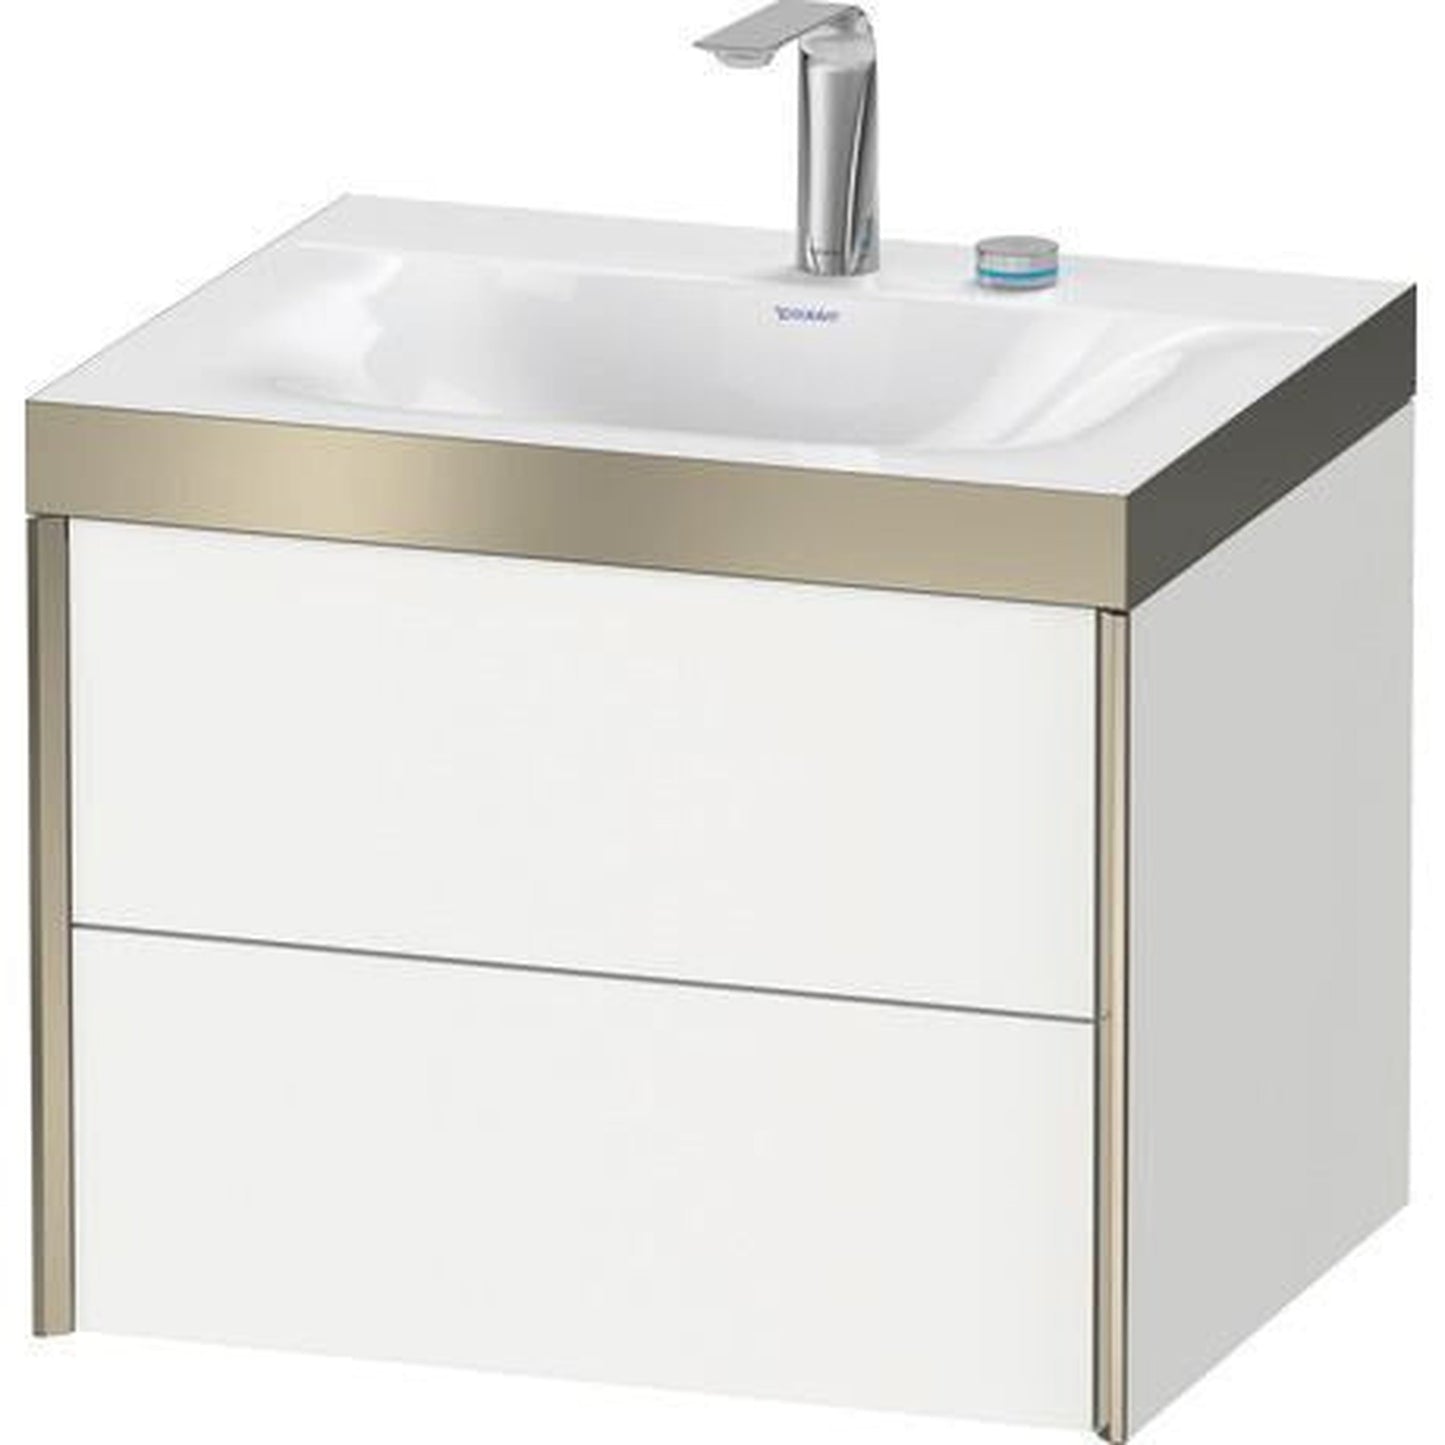 Duravit Xviu 24" x 20" x 19" Two Drawer C-Bonded Wall-Mount Vanity Kit With Two Tap Holes, White (XV4614EB118P)